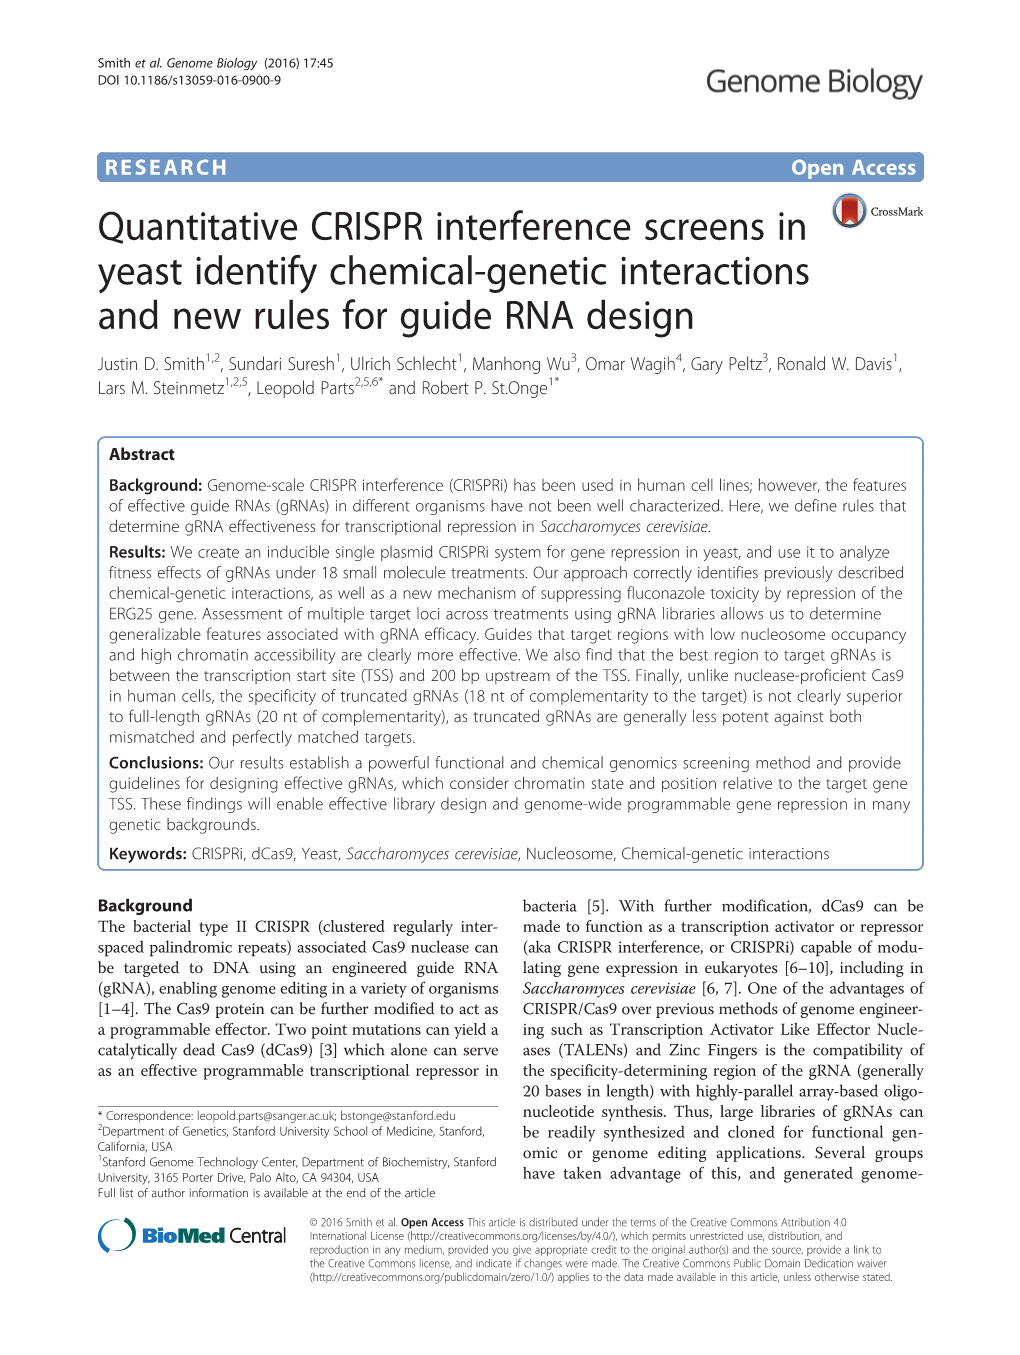 Quantitative CRISPR Interference Screens in Yeast Identify Chemical-Genetic Interactions and New Rules for Guide RNA Design Justin D